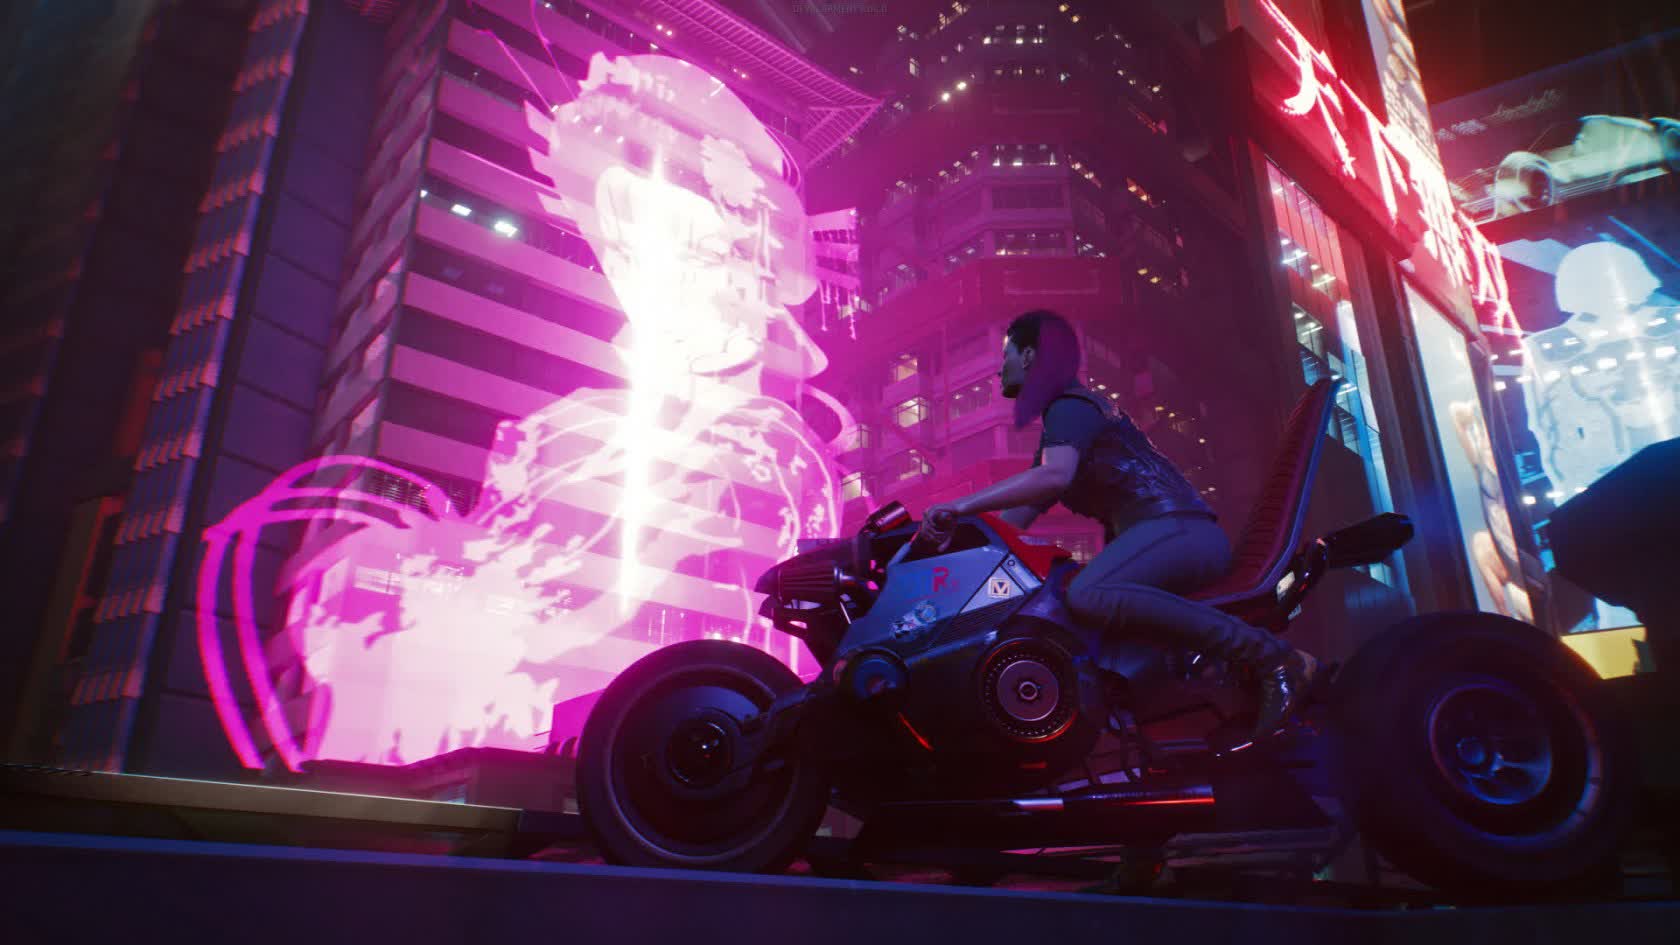 Cyberpunk 2077 has been delayed a third time to December 10